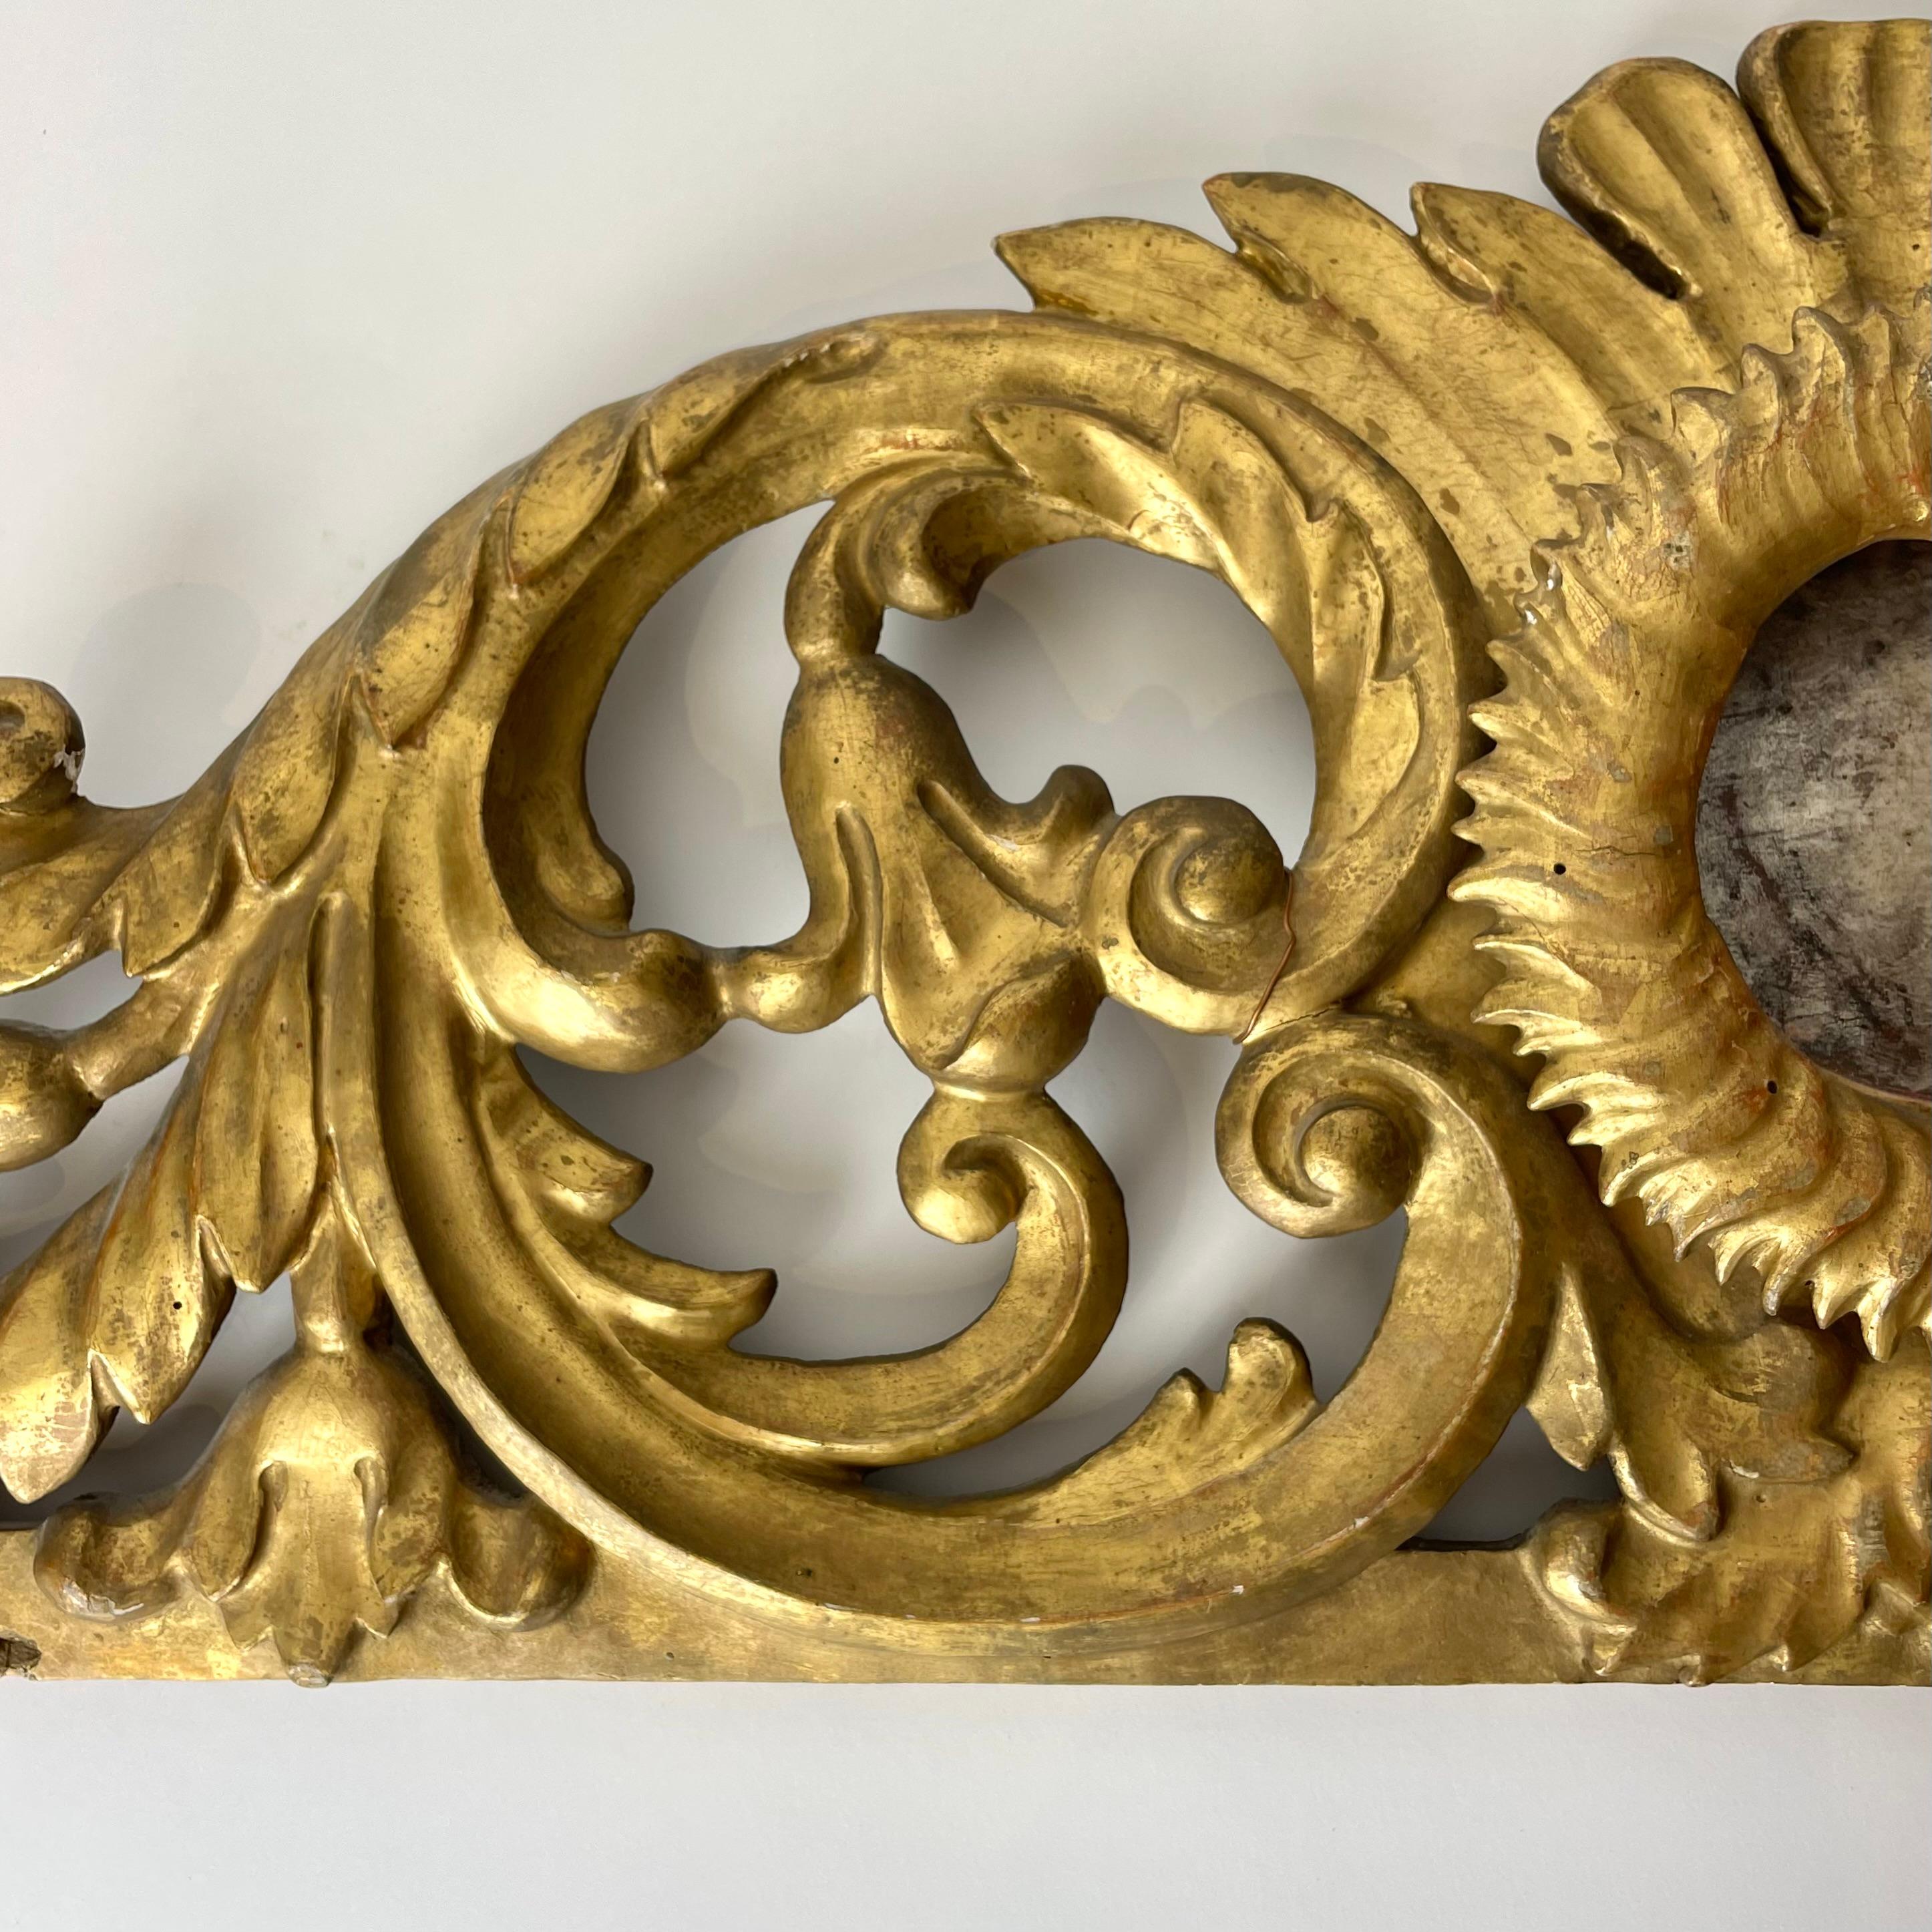 European Decorative Door Moulding Architrave Gilt and Silvered Wood Panel, 18th Century For Sale